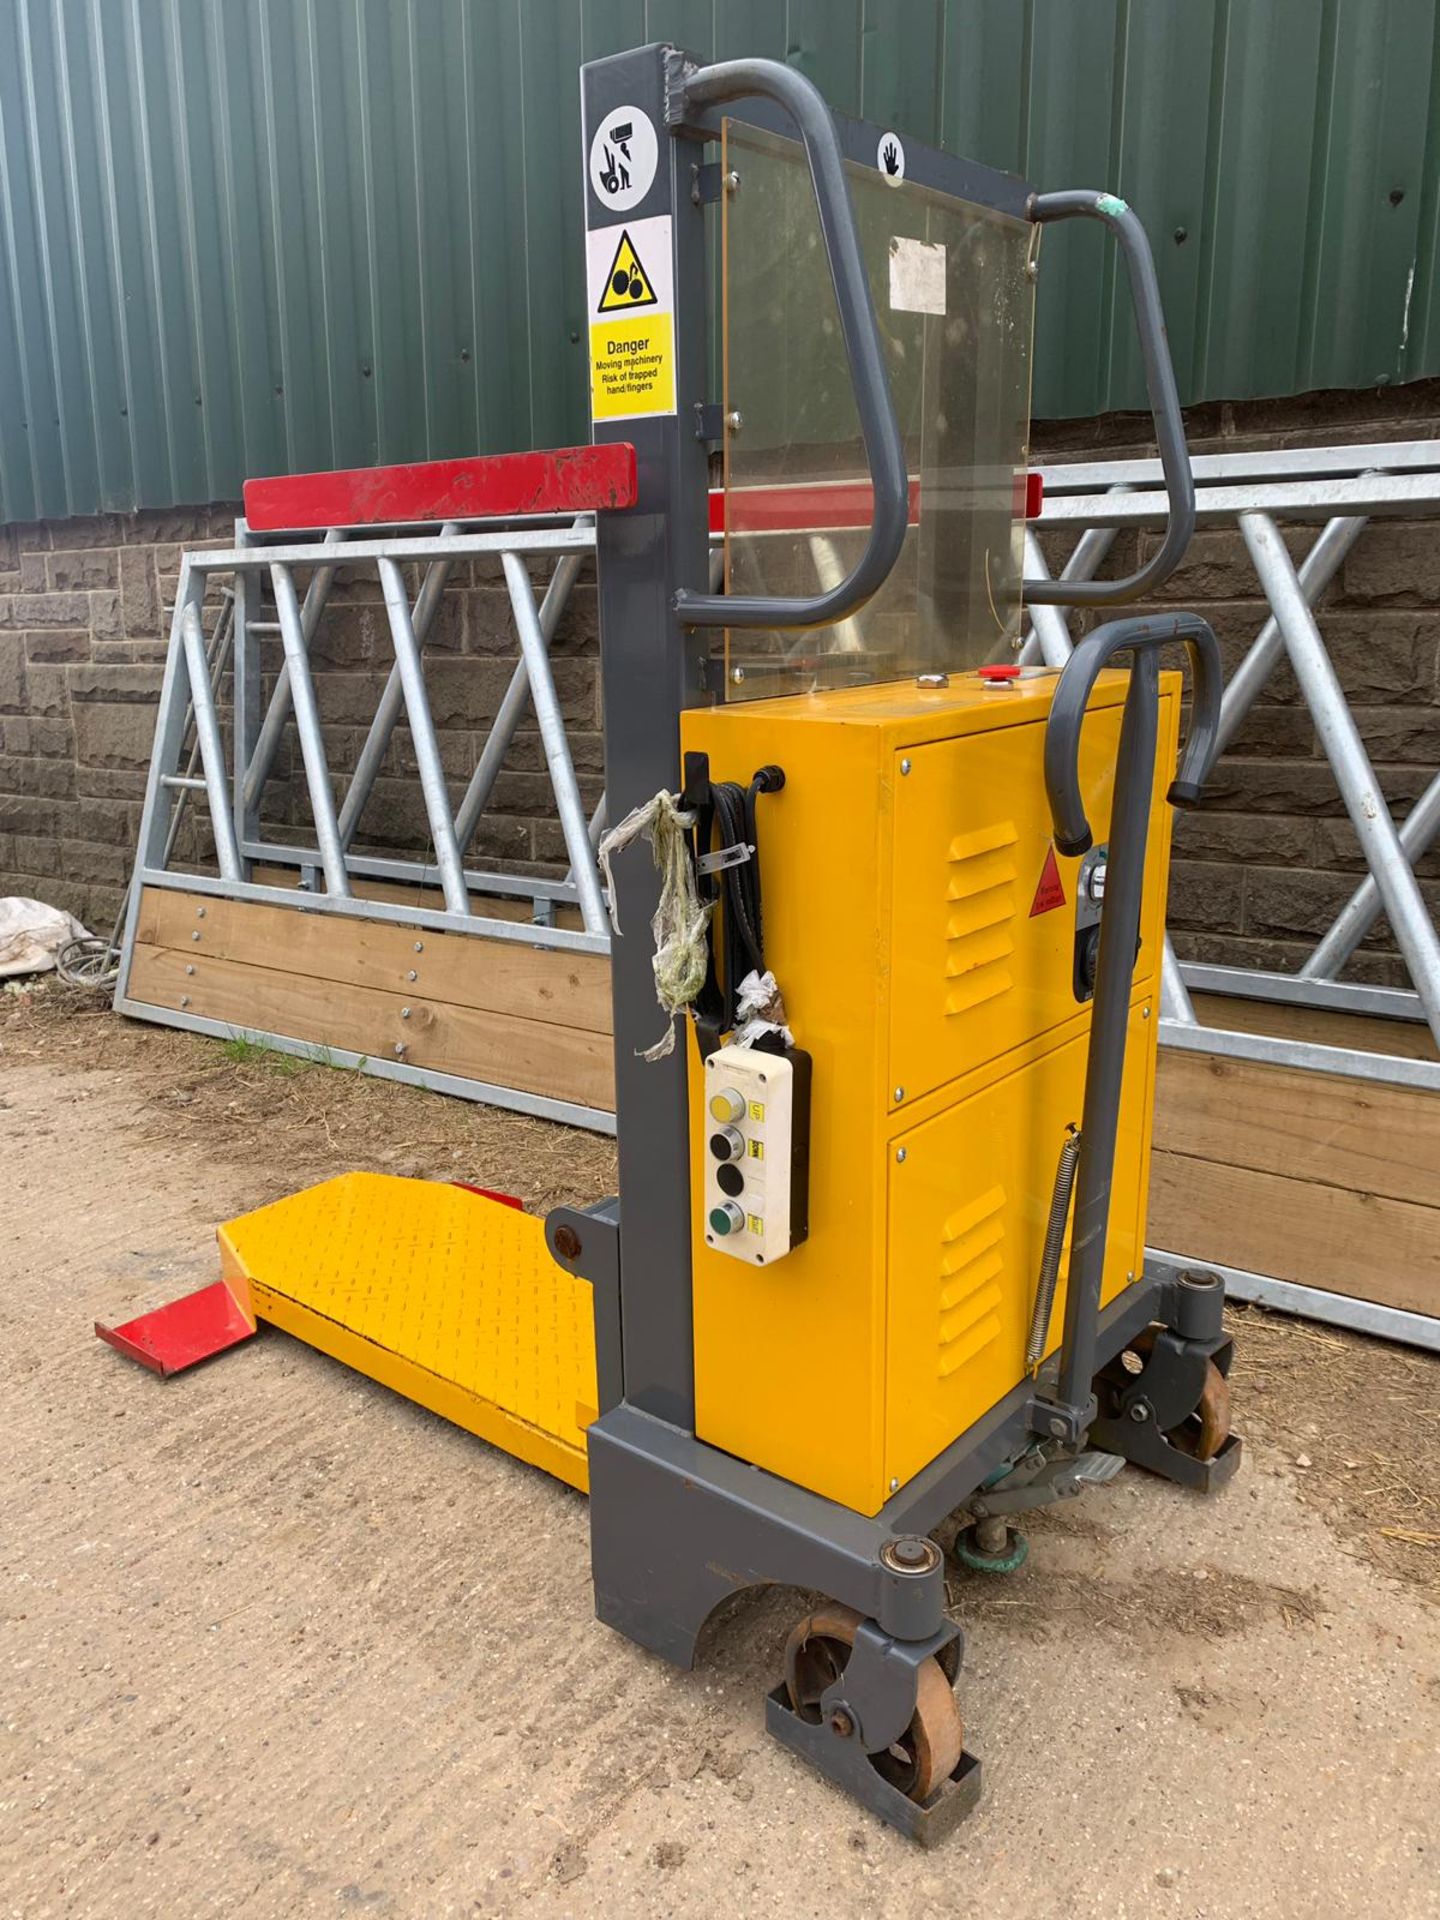 WARRIOR YM250 ELECTRIC PALLET TRUCK, WEIGHT 270 KGS, LIFT HEIGHT 1M, YEAR 2013 *PLUS VAT* - Image 6 of 9